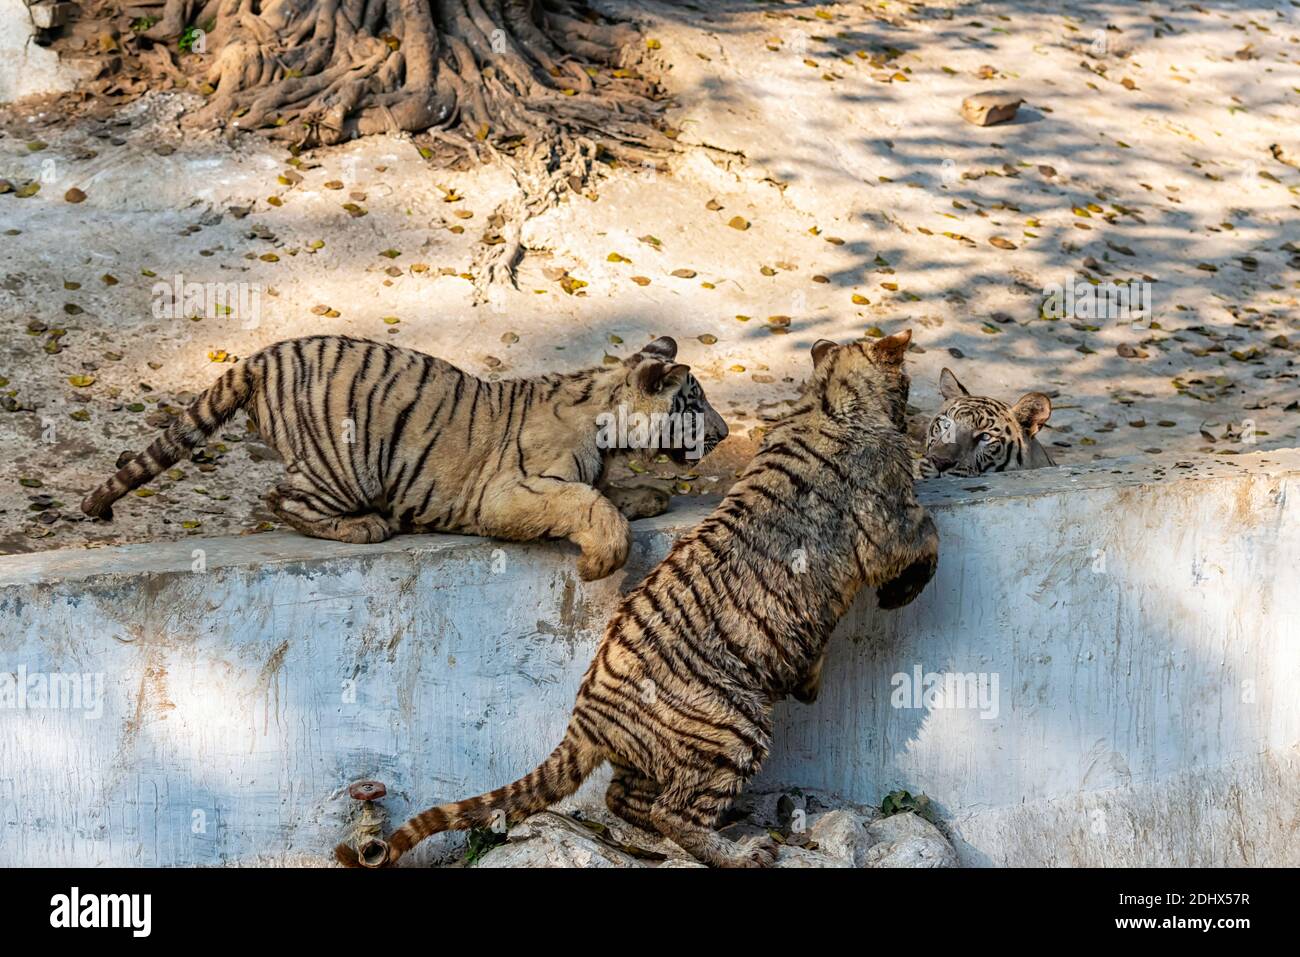 Three white Bengal tiger cubs playing with each other in the tiger enclosure at the National Zoological Park Delhi, also known as the Delhi Zoo. Stock Photo